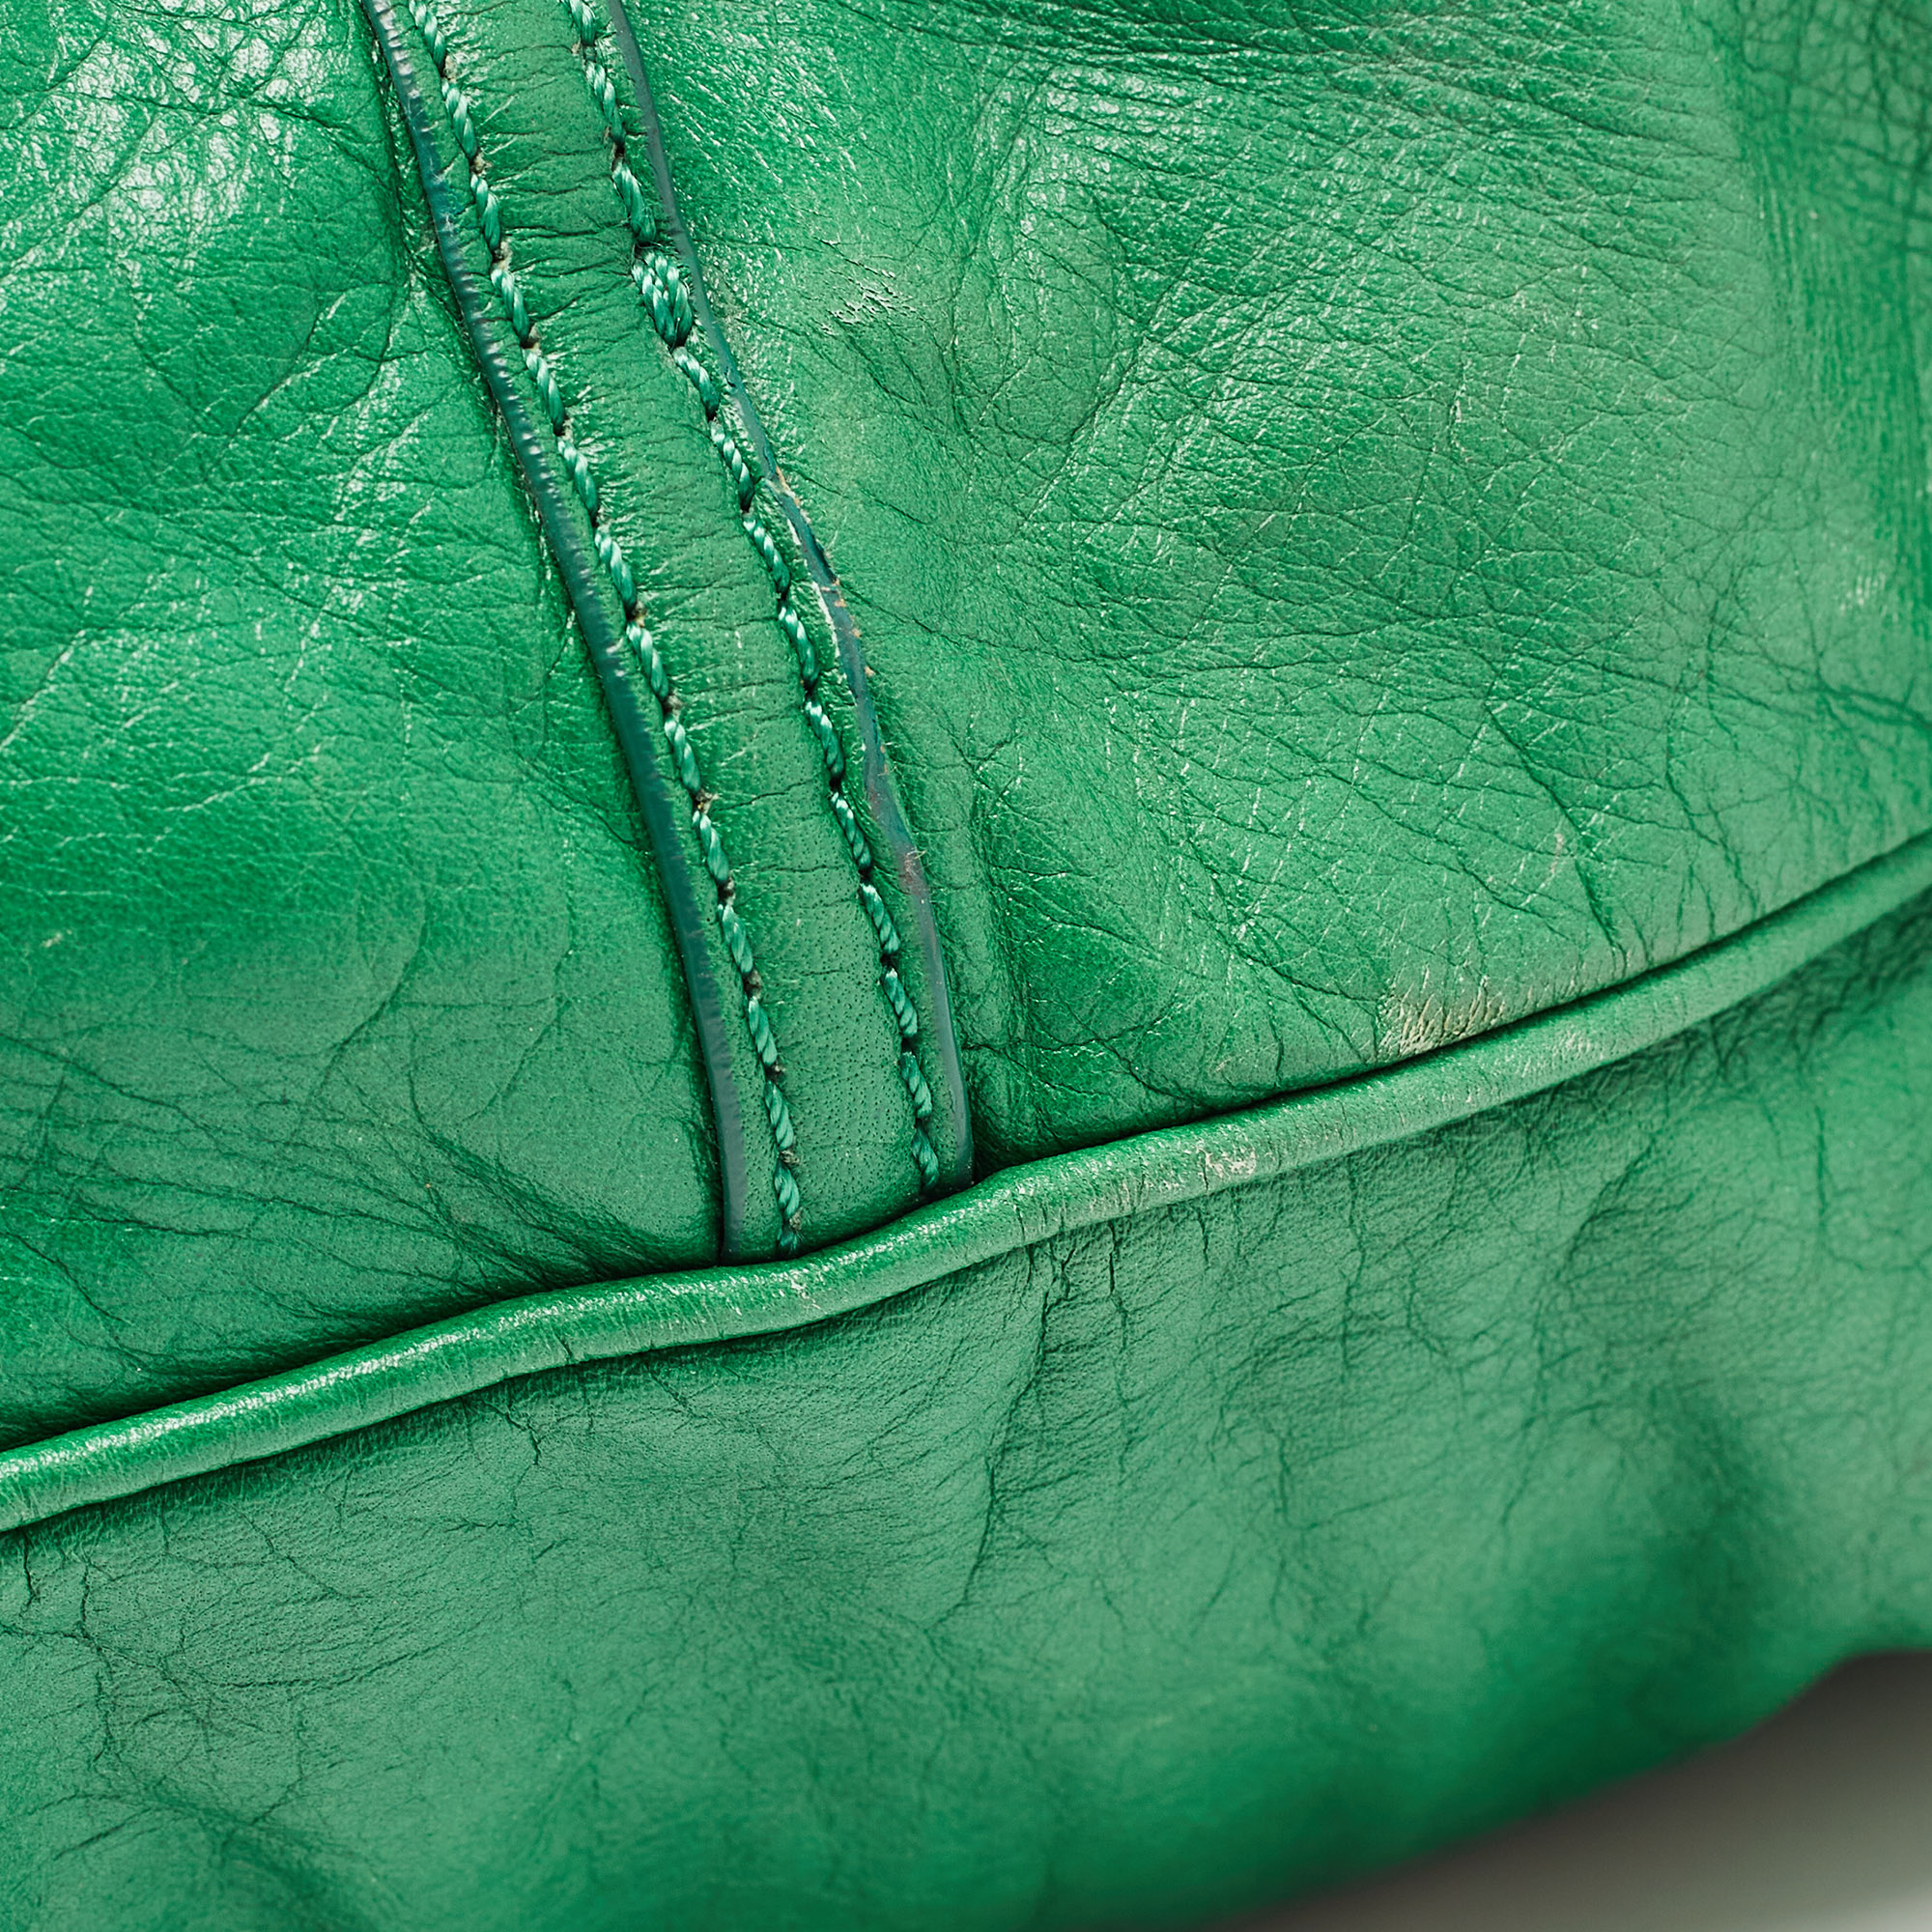 Marc By Marc Jacobs Green Leather Turnlock Faridah Hobo